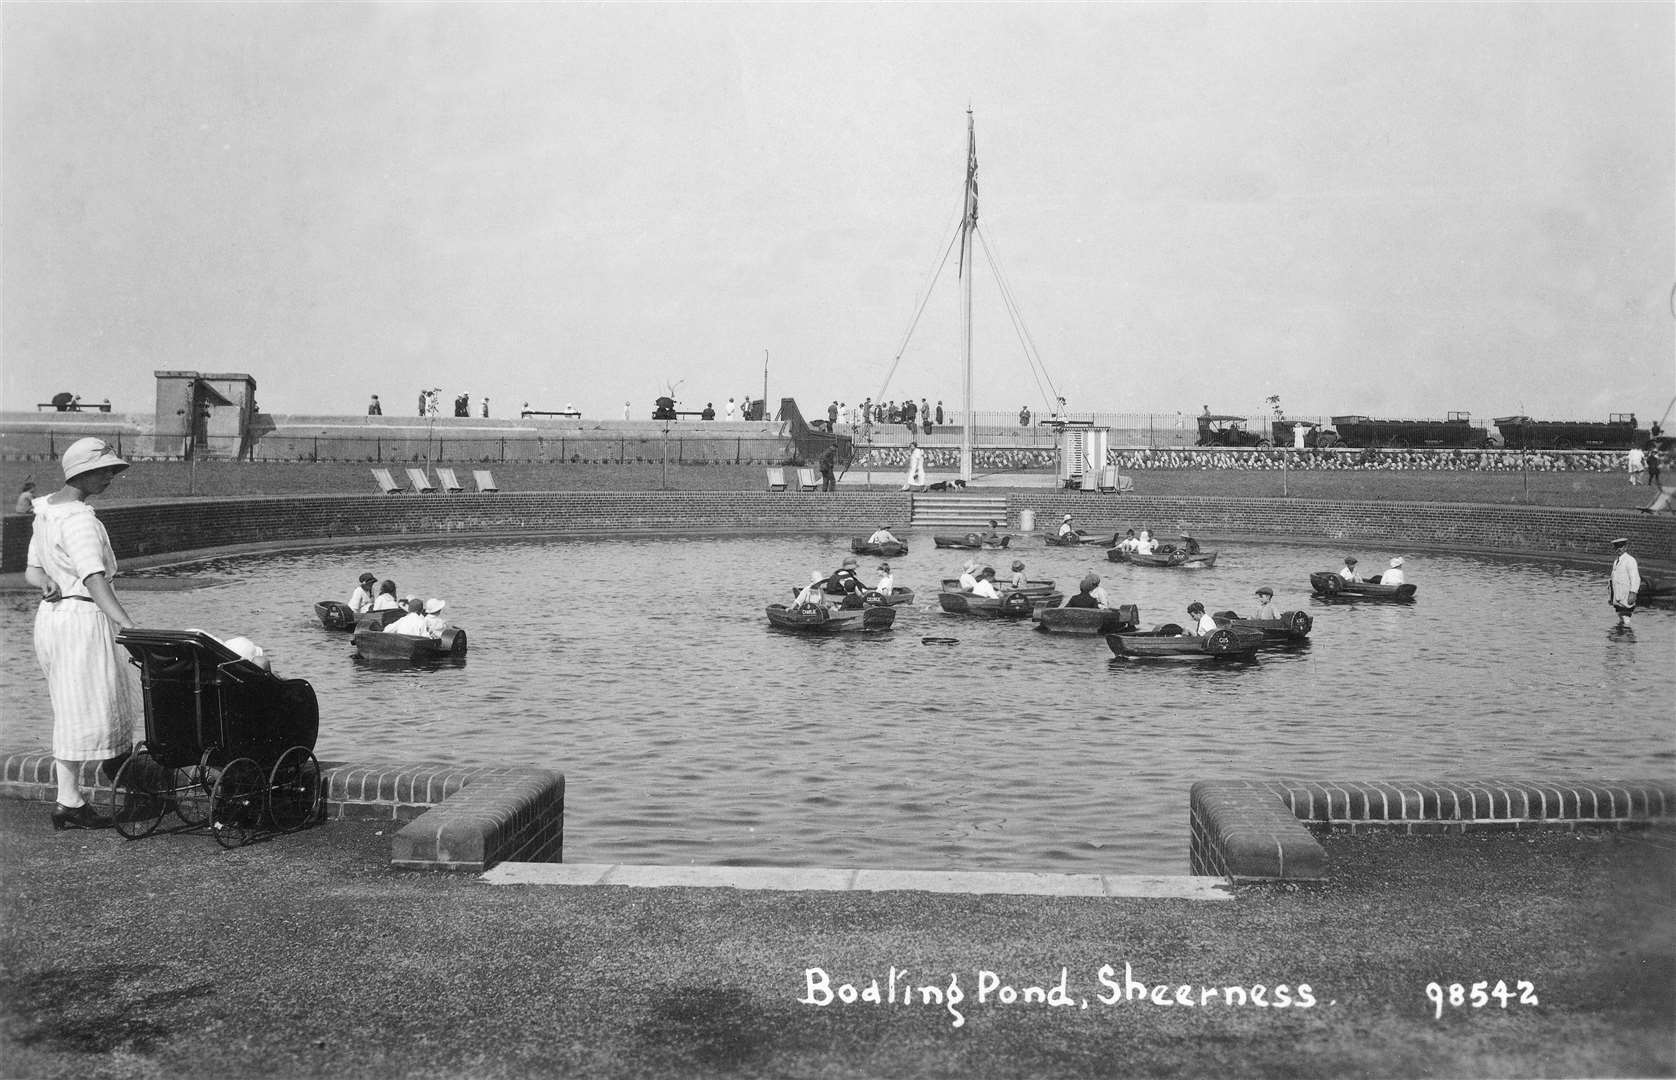 The Sheerness boating lake, now a children's sandpit, was popular with daytrippers